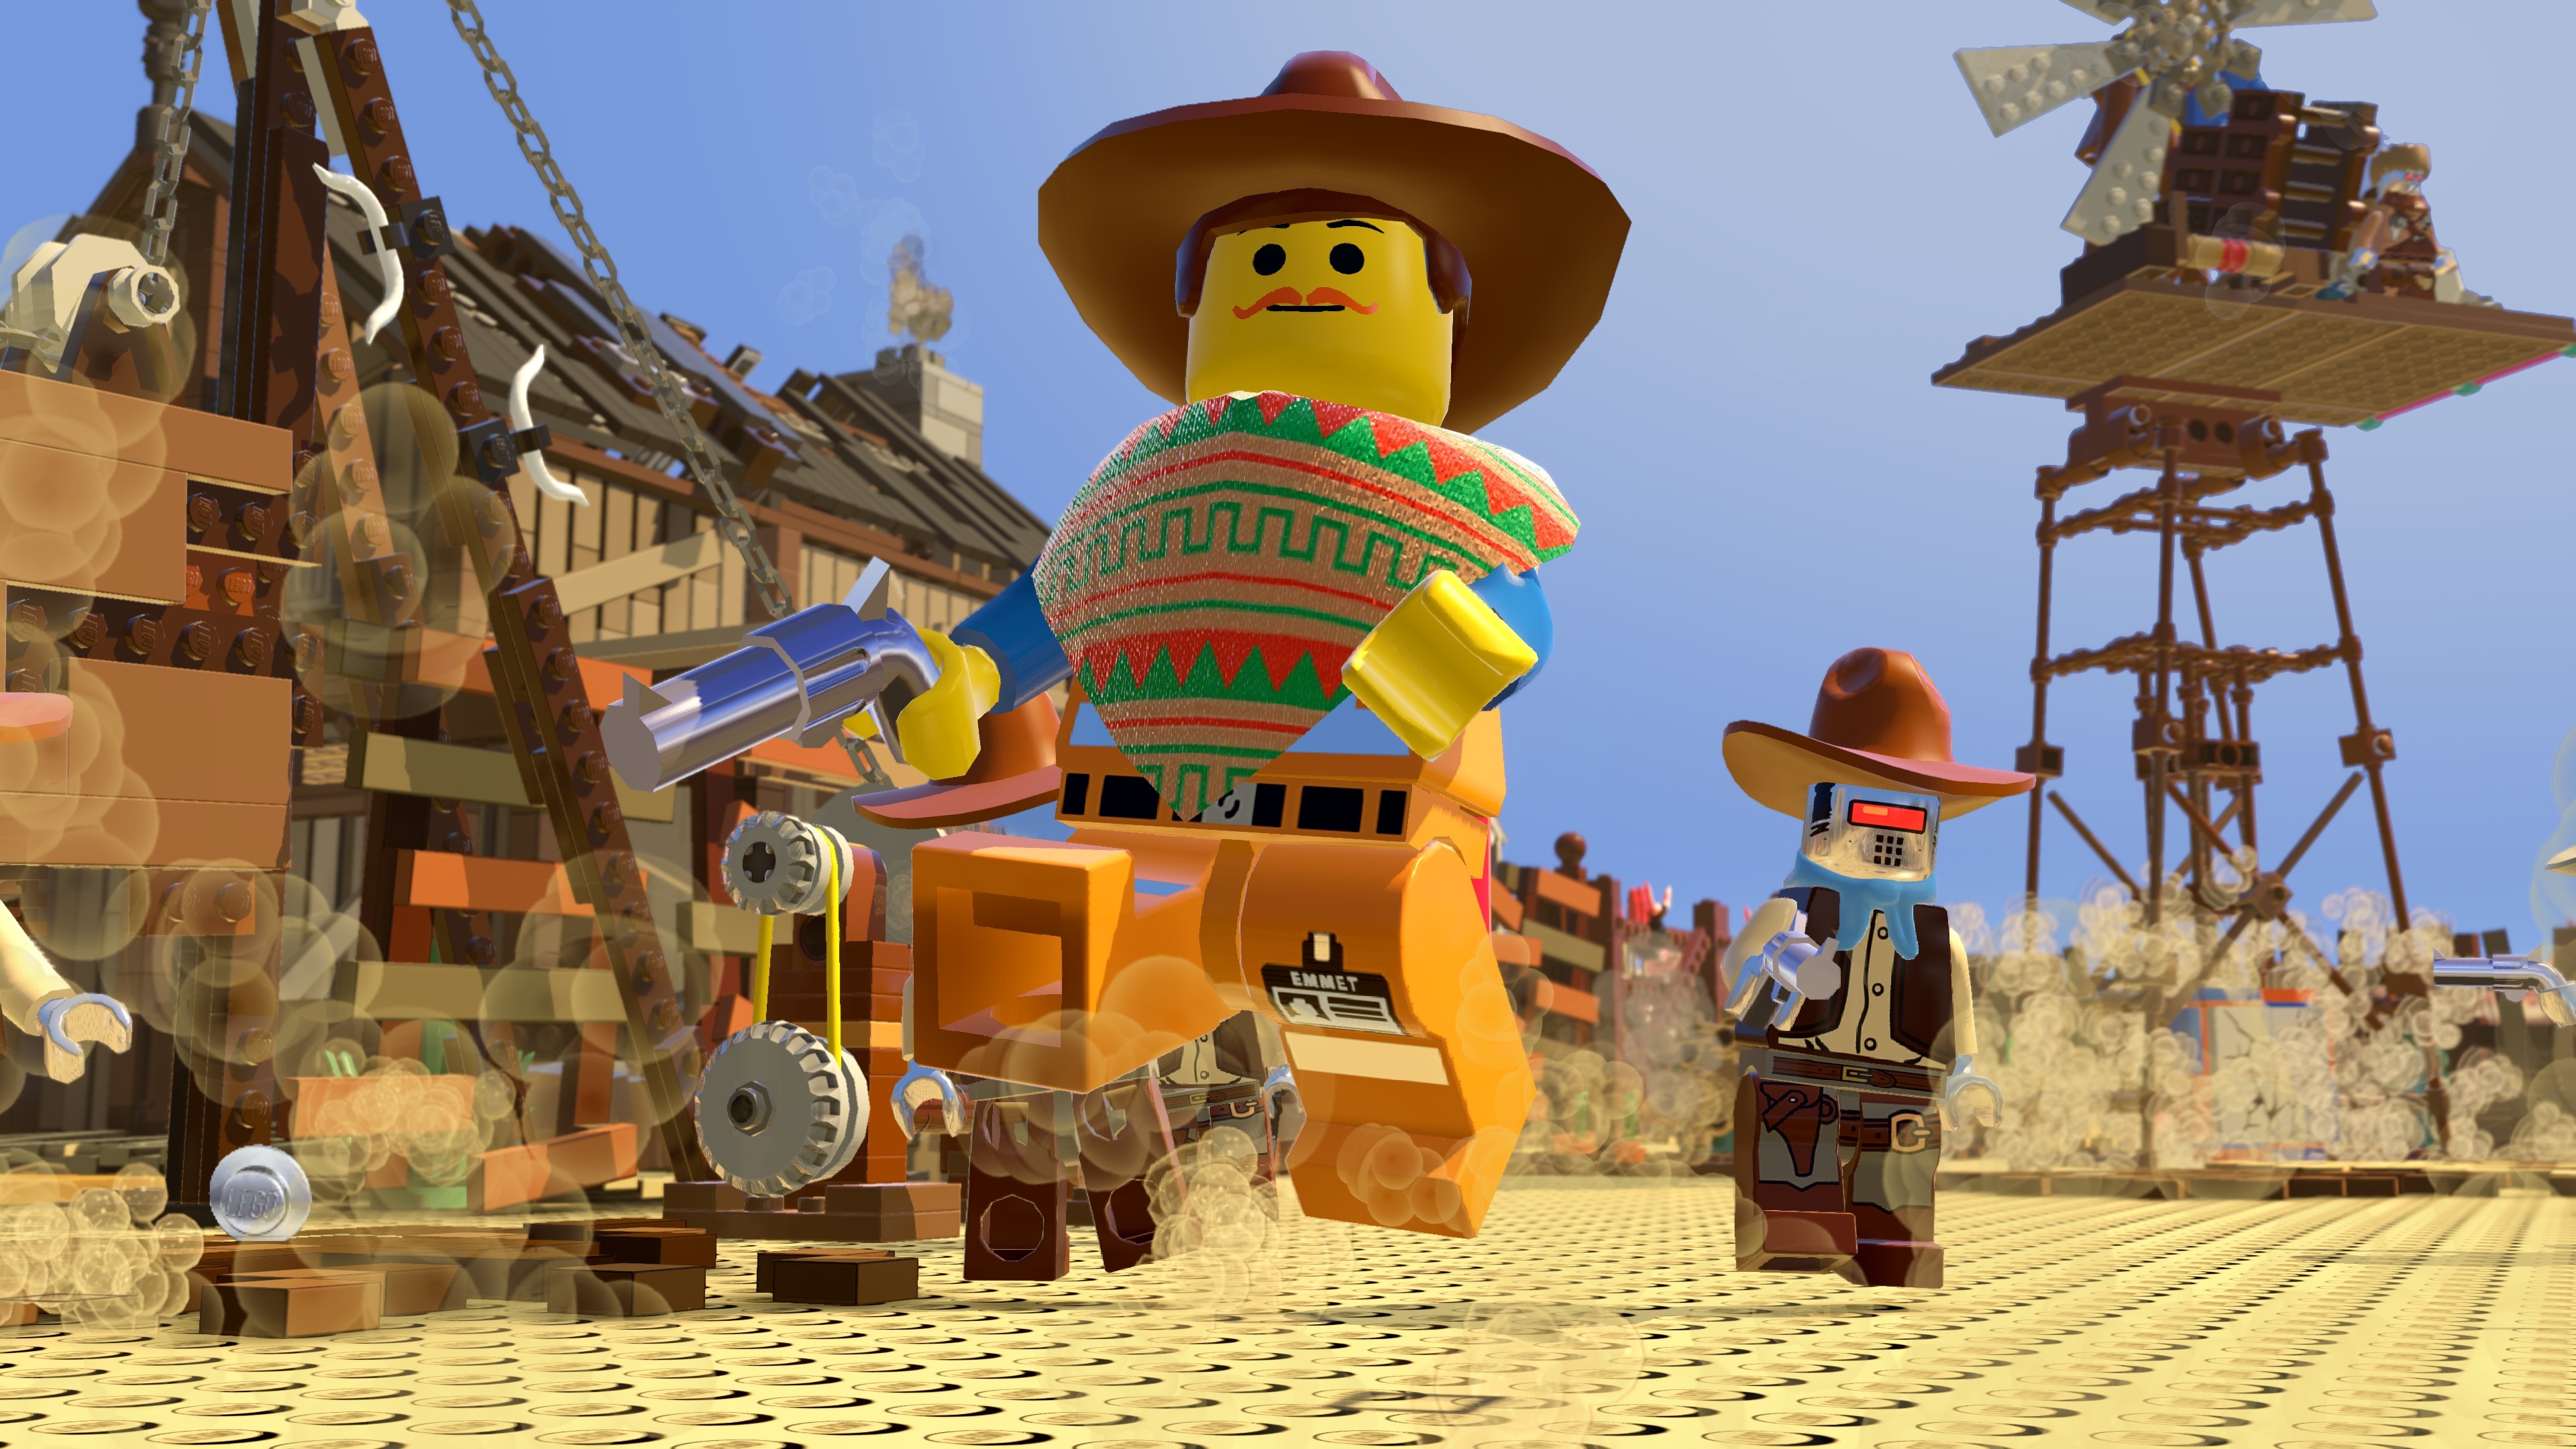 3840x2160 ... The LEGO Movie Videogame